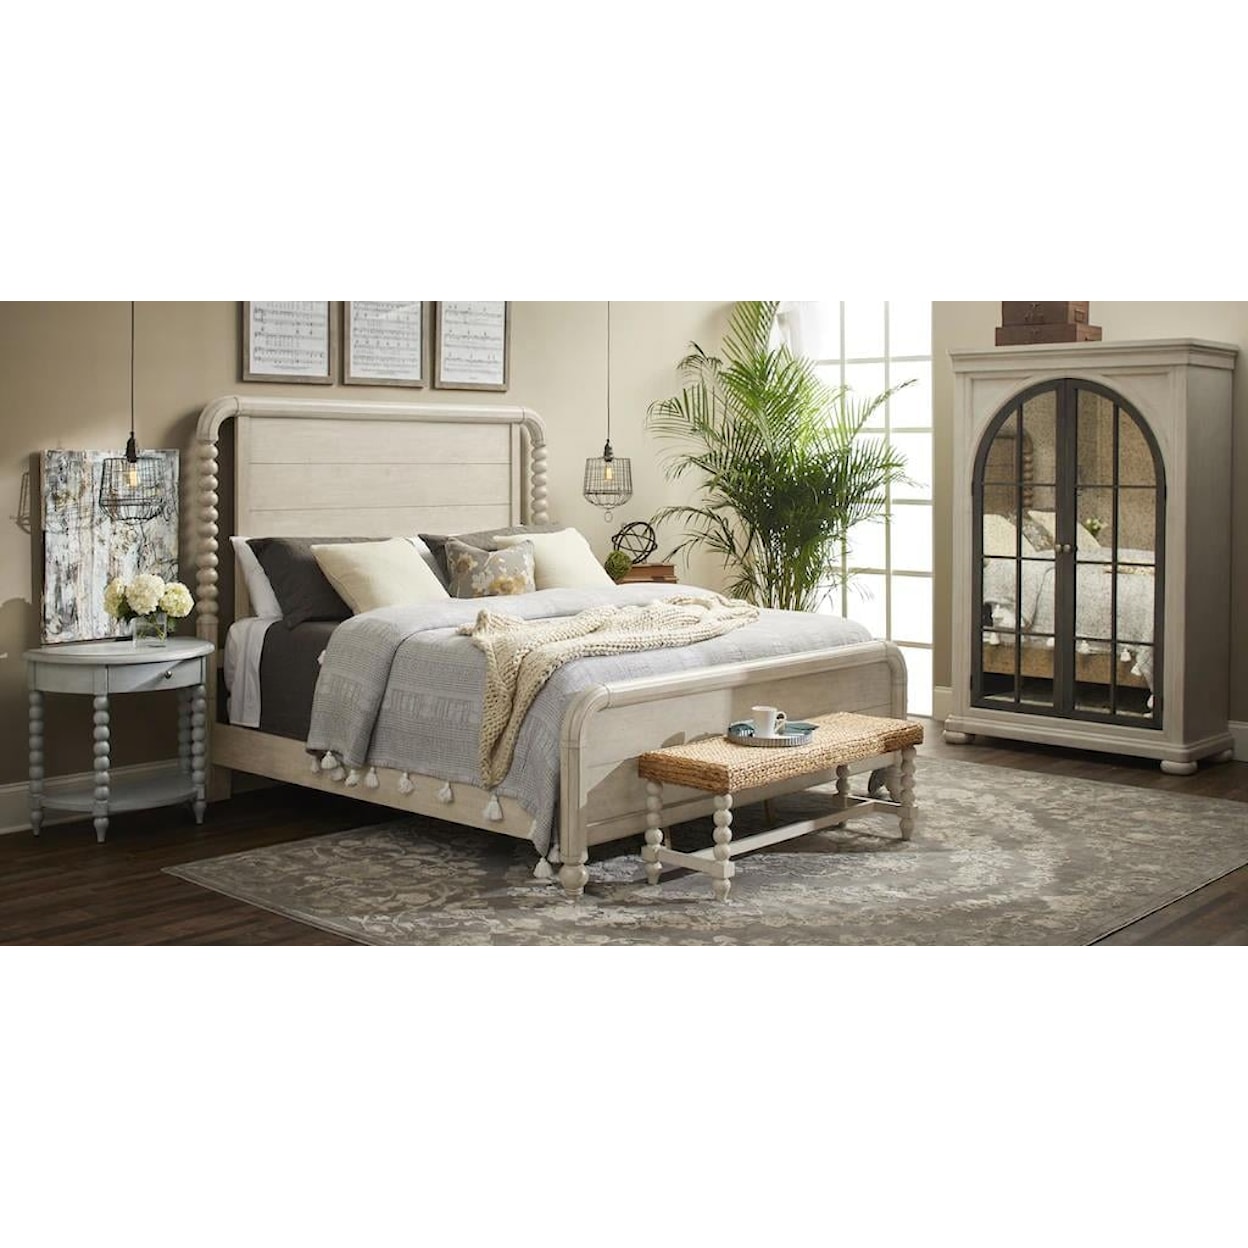 Trisha Yearwood Home Collection by Legacy Classic Nashville Panel Post Bed, Cal. King